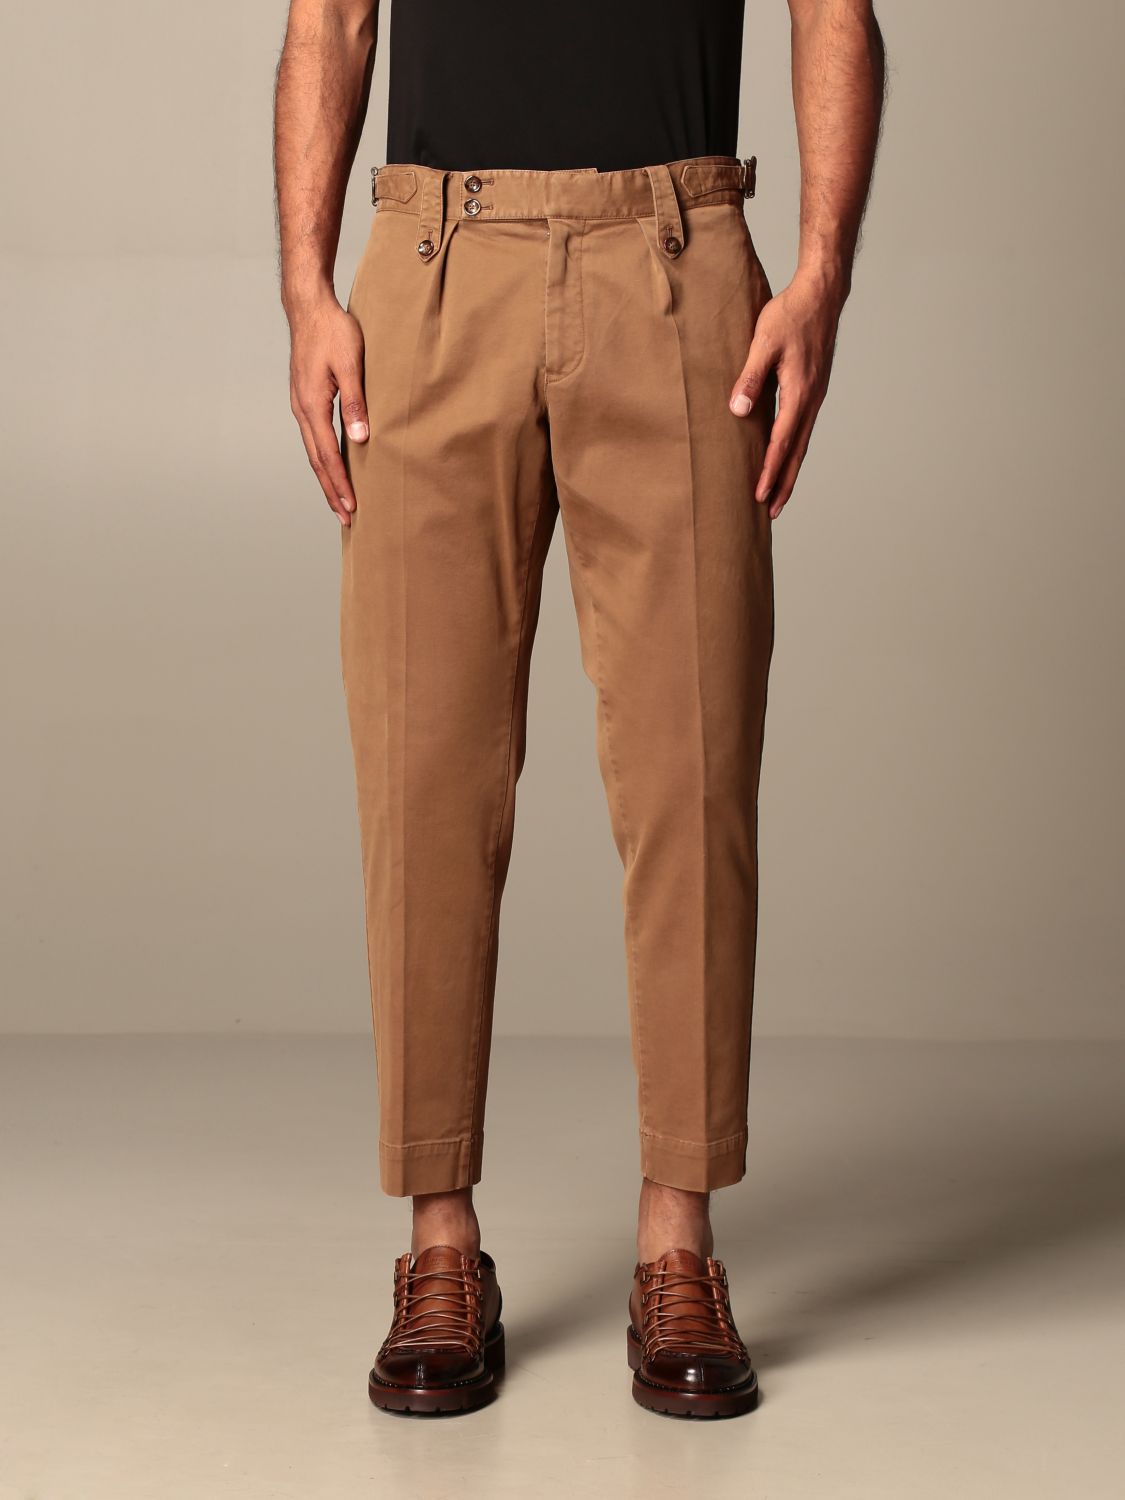 Pt trousers with belt loops and buttons